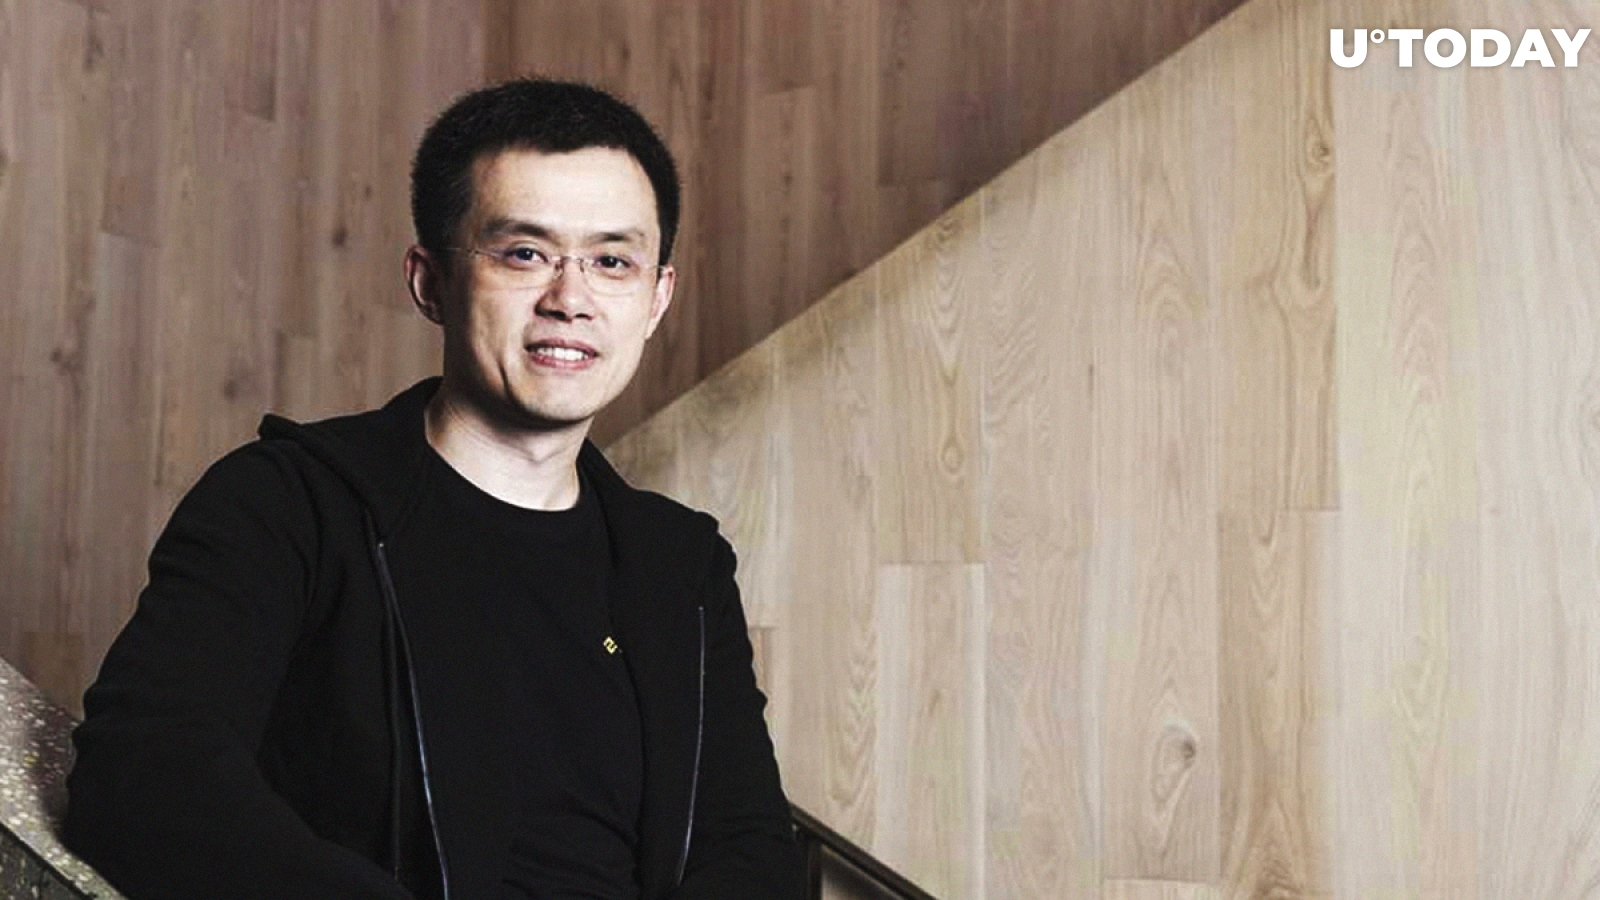 CZ Binance Slammed for Lack of Transparency as Absence of Malta License News Spreads Fast